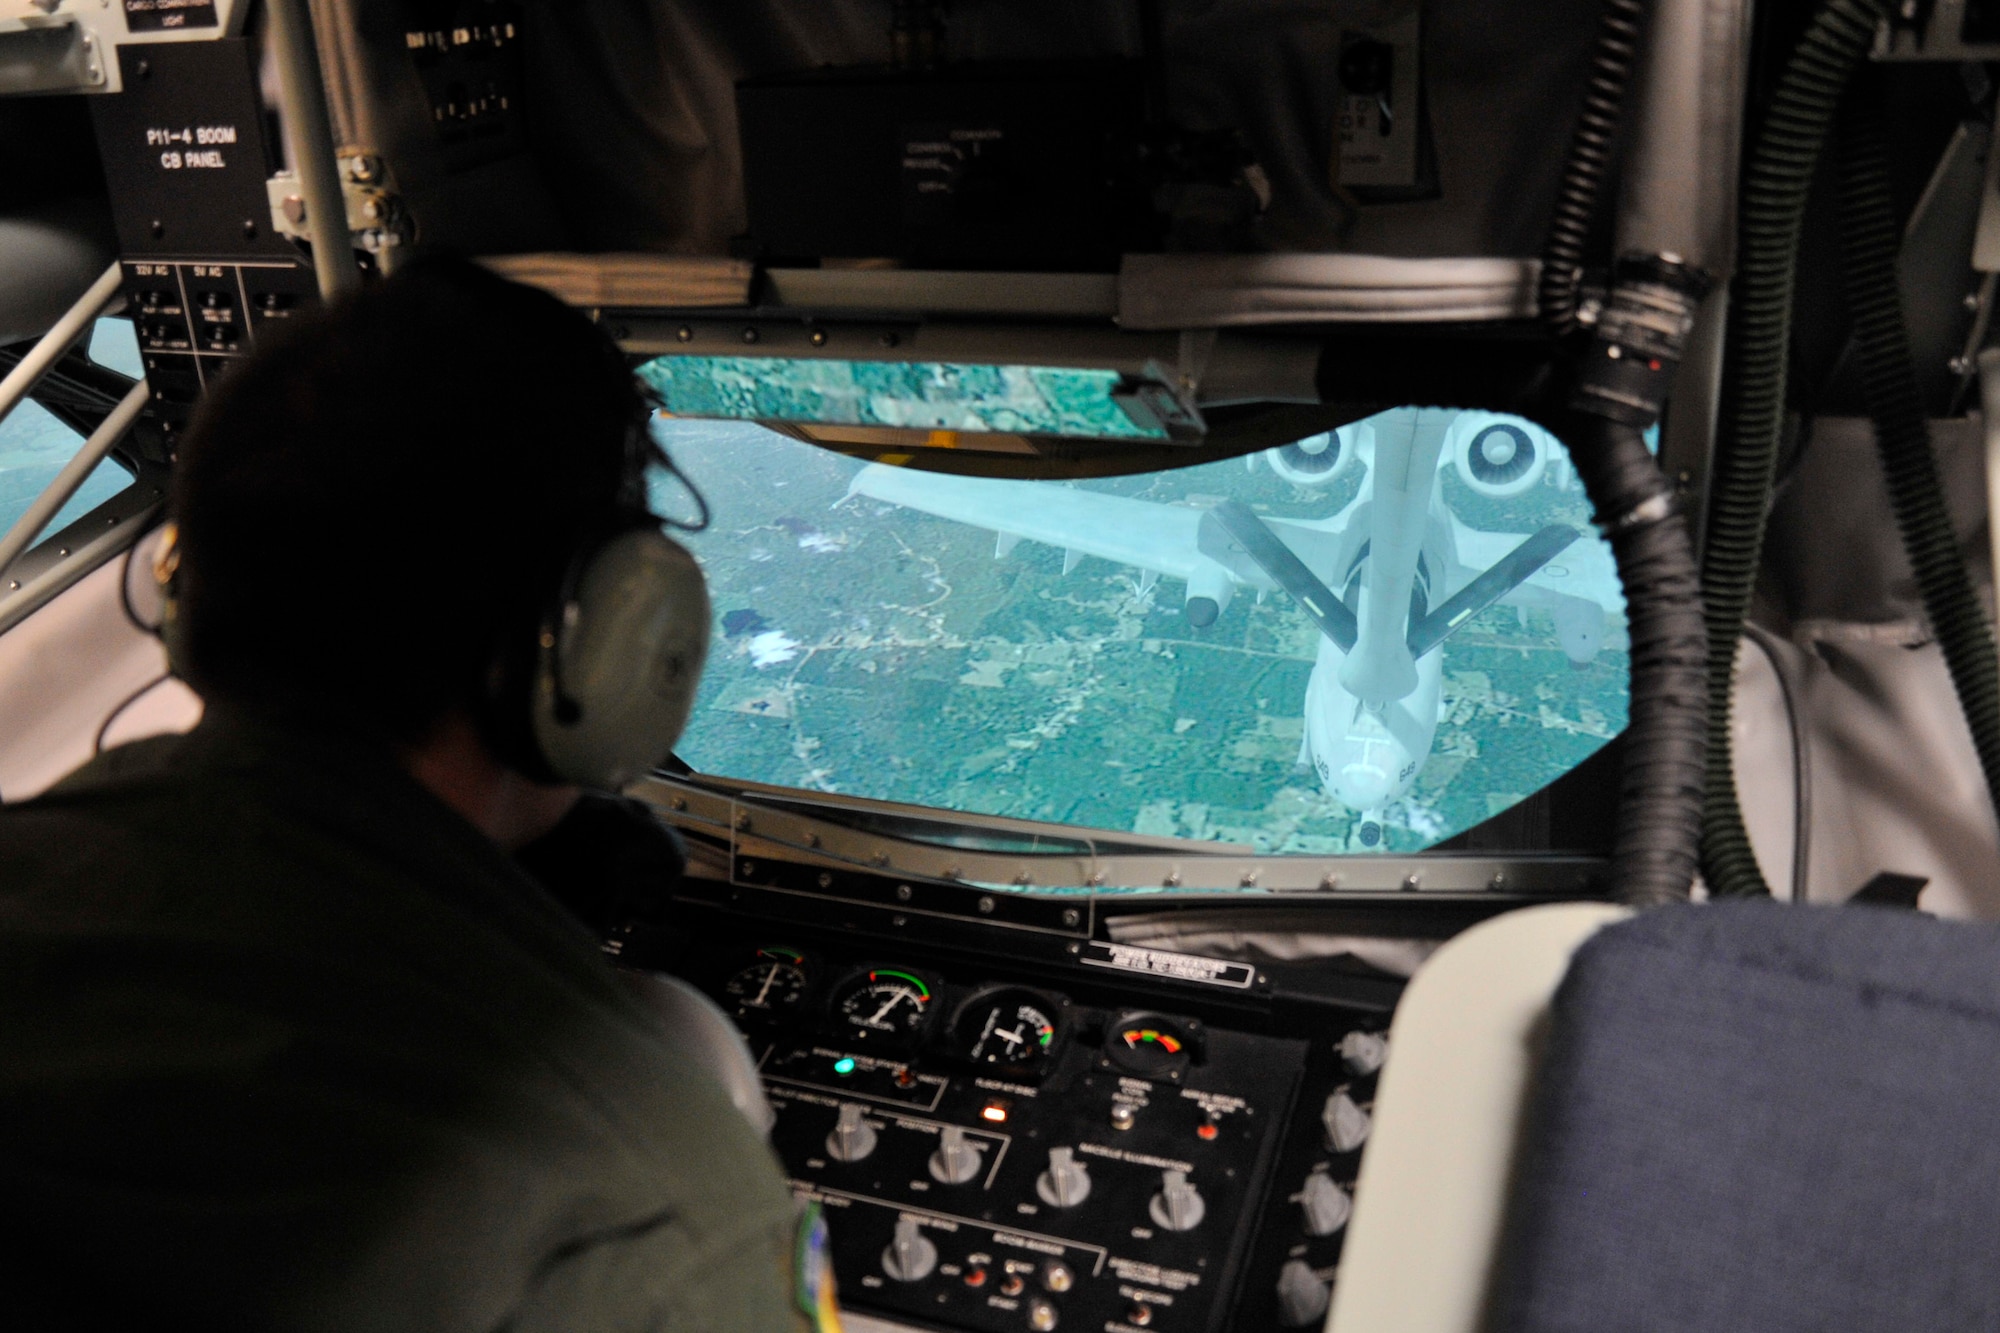 Staff Sgt. Michael Weidman, 92nd Operations Support Squadron instructor boom operator, operates the boom simulator Feb. 17, 2015, at Fairchild Air Force Base, Wash. This training gives boom operators the opportunity to practice emergency procedures without risking damage to the aircraft. (U.S. Air Force photo/Airman 1st Class Nicolo J. Daniello) 